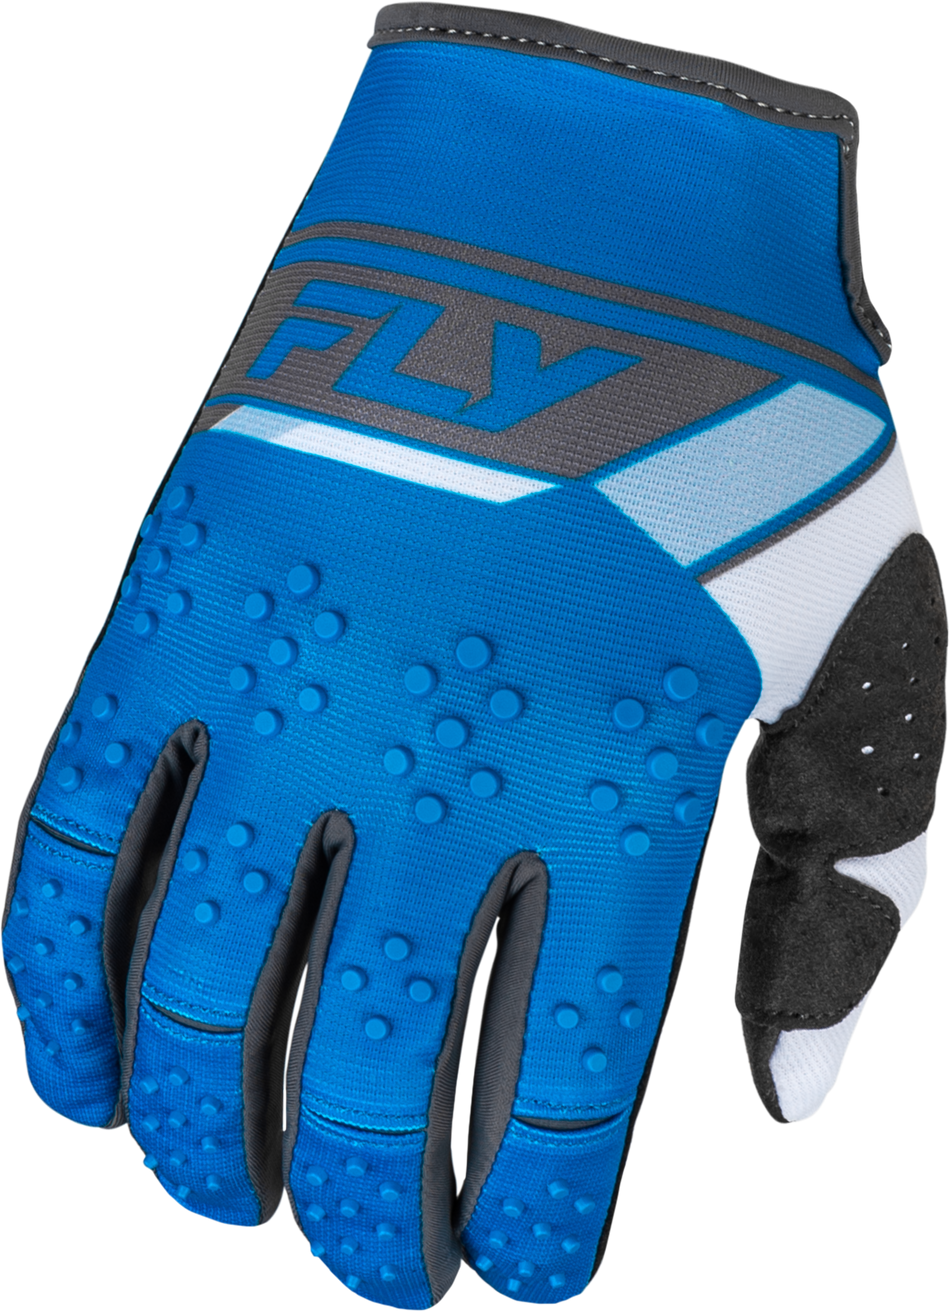 FLY RACING Kinetic Prix Gloves Bright Blue/Charcoal Xl 377-410X